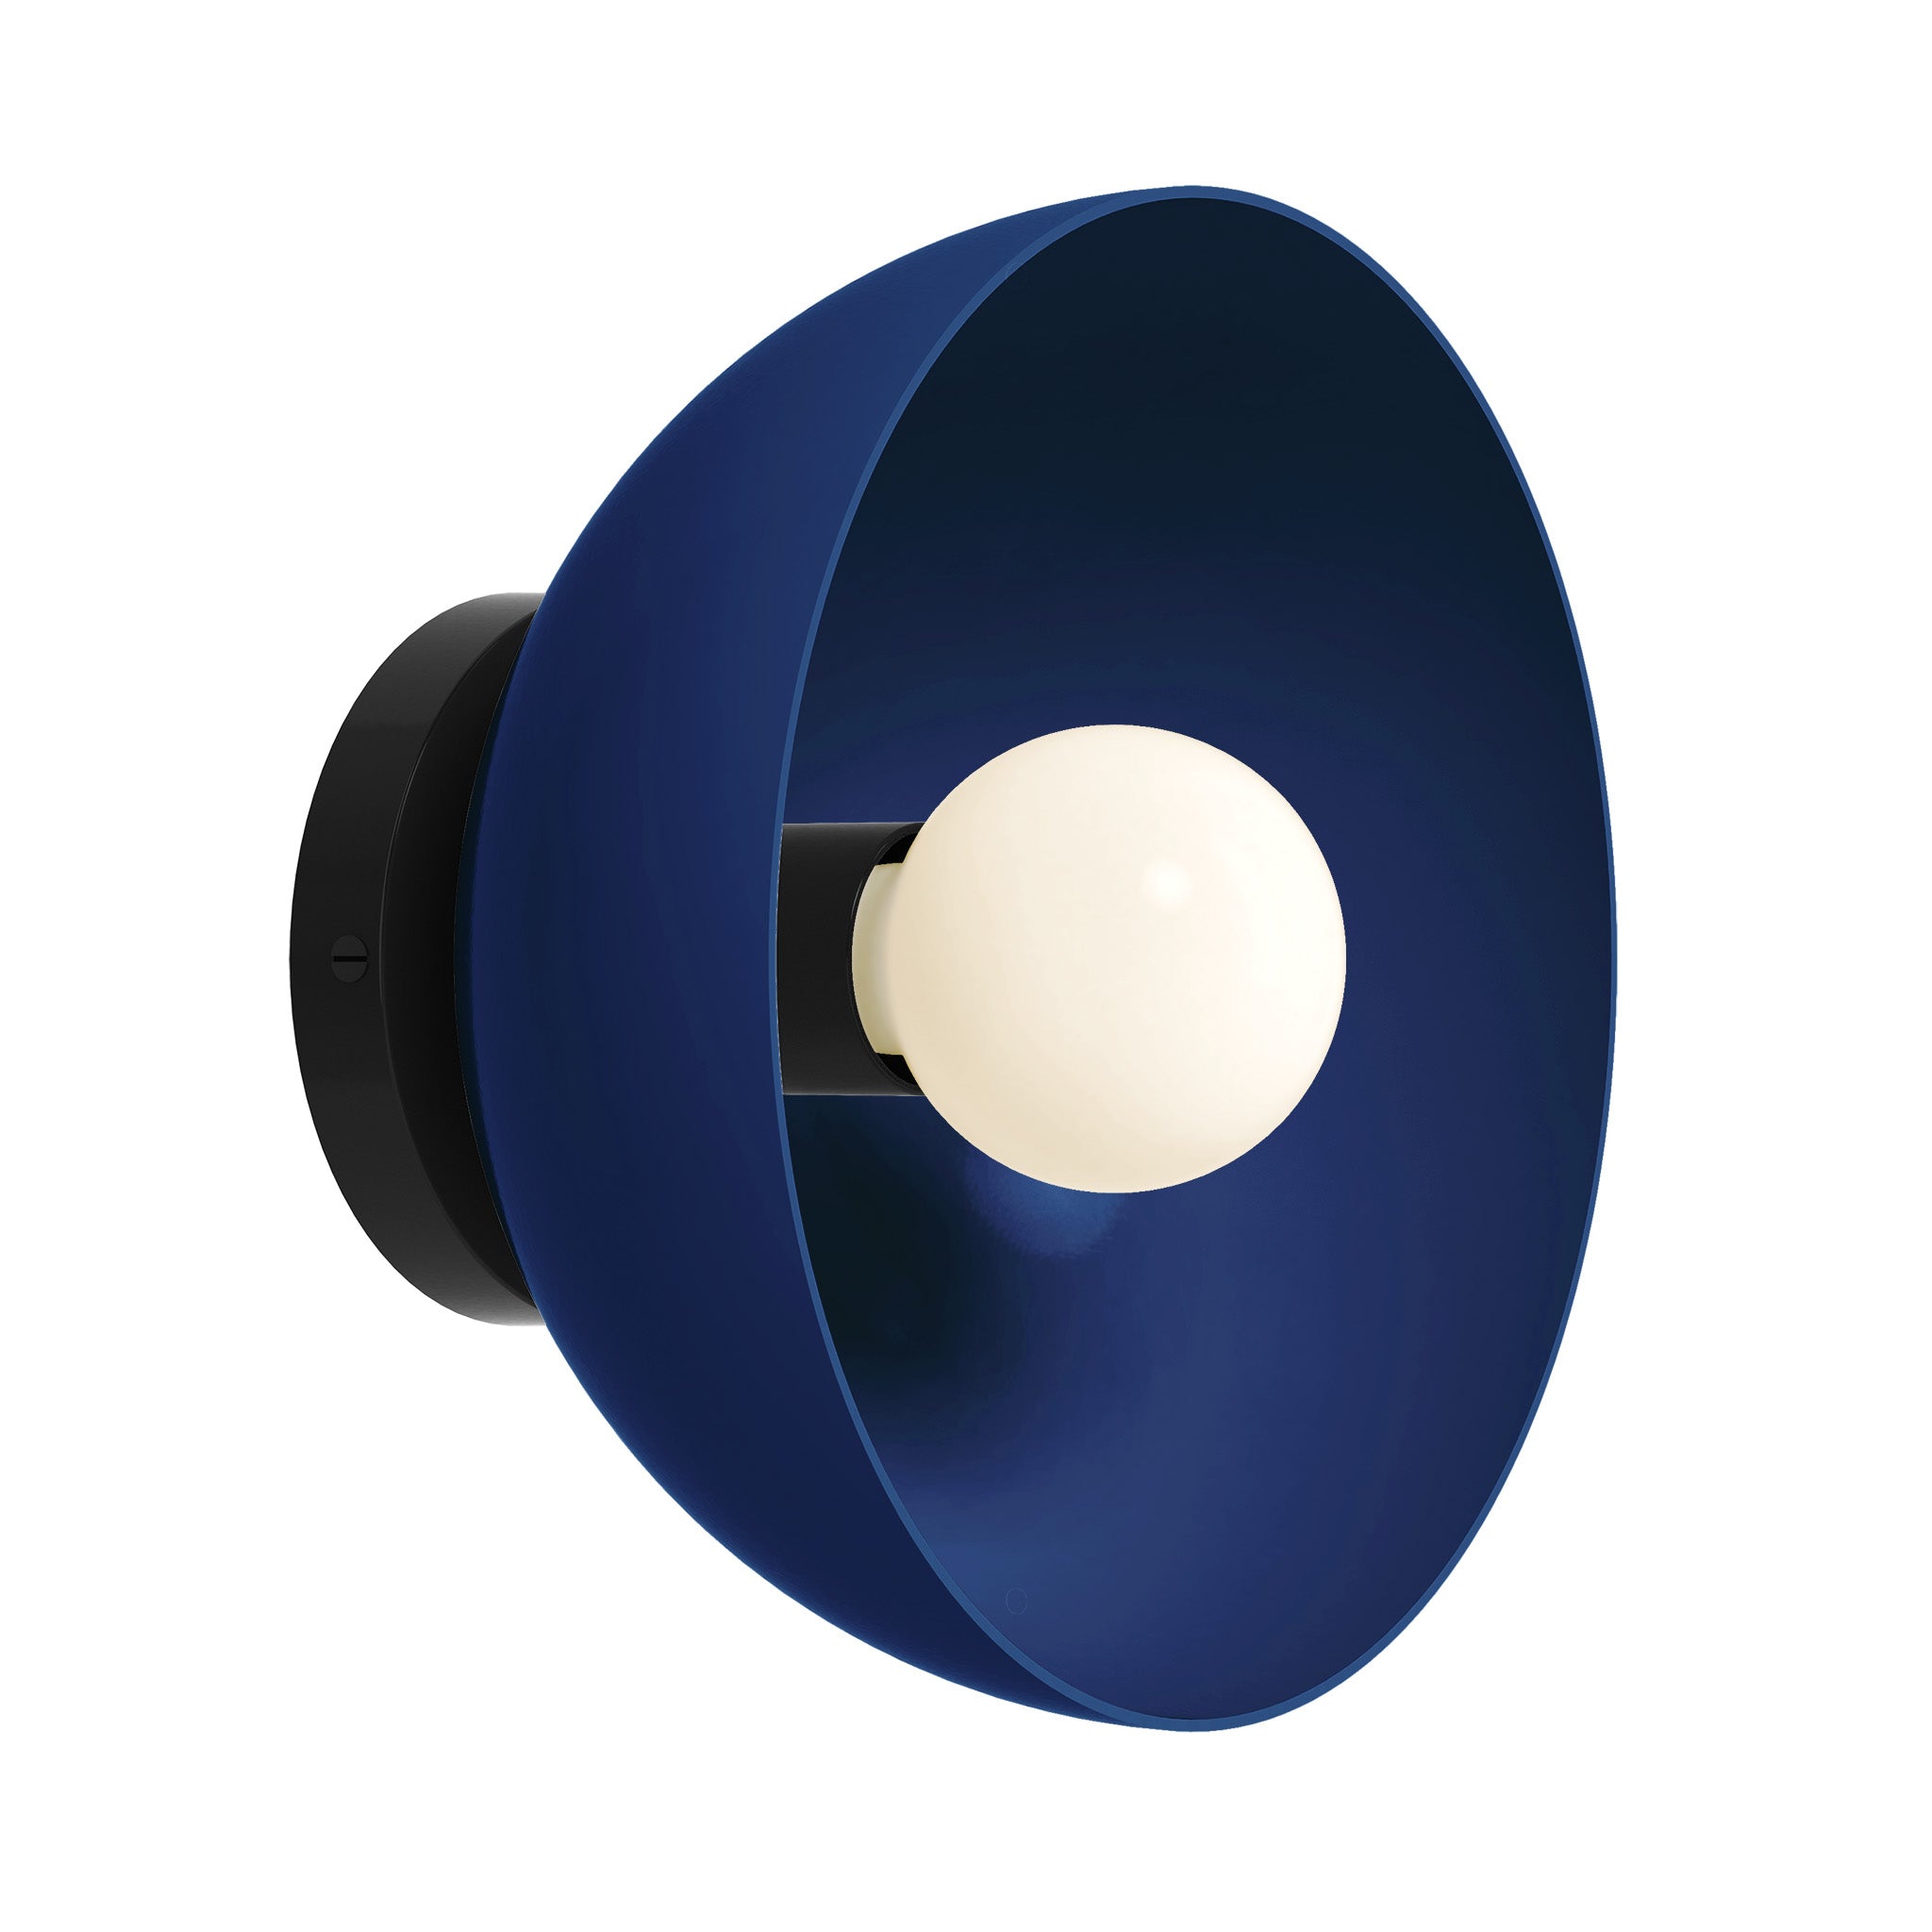 Black and cobalt color hemi dome sconce 10" Dutton Brown lighting